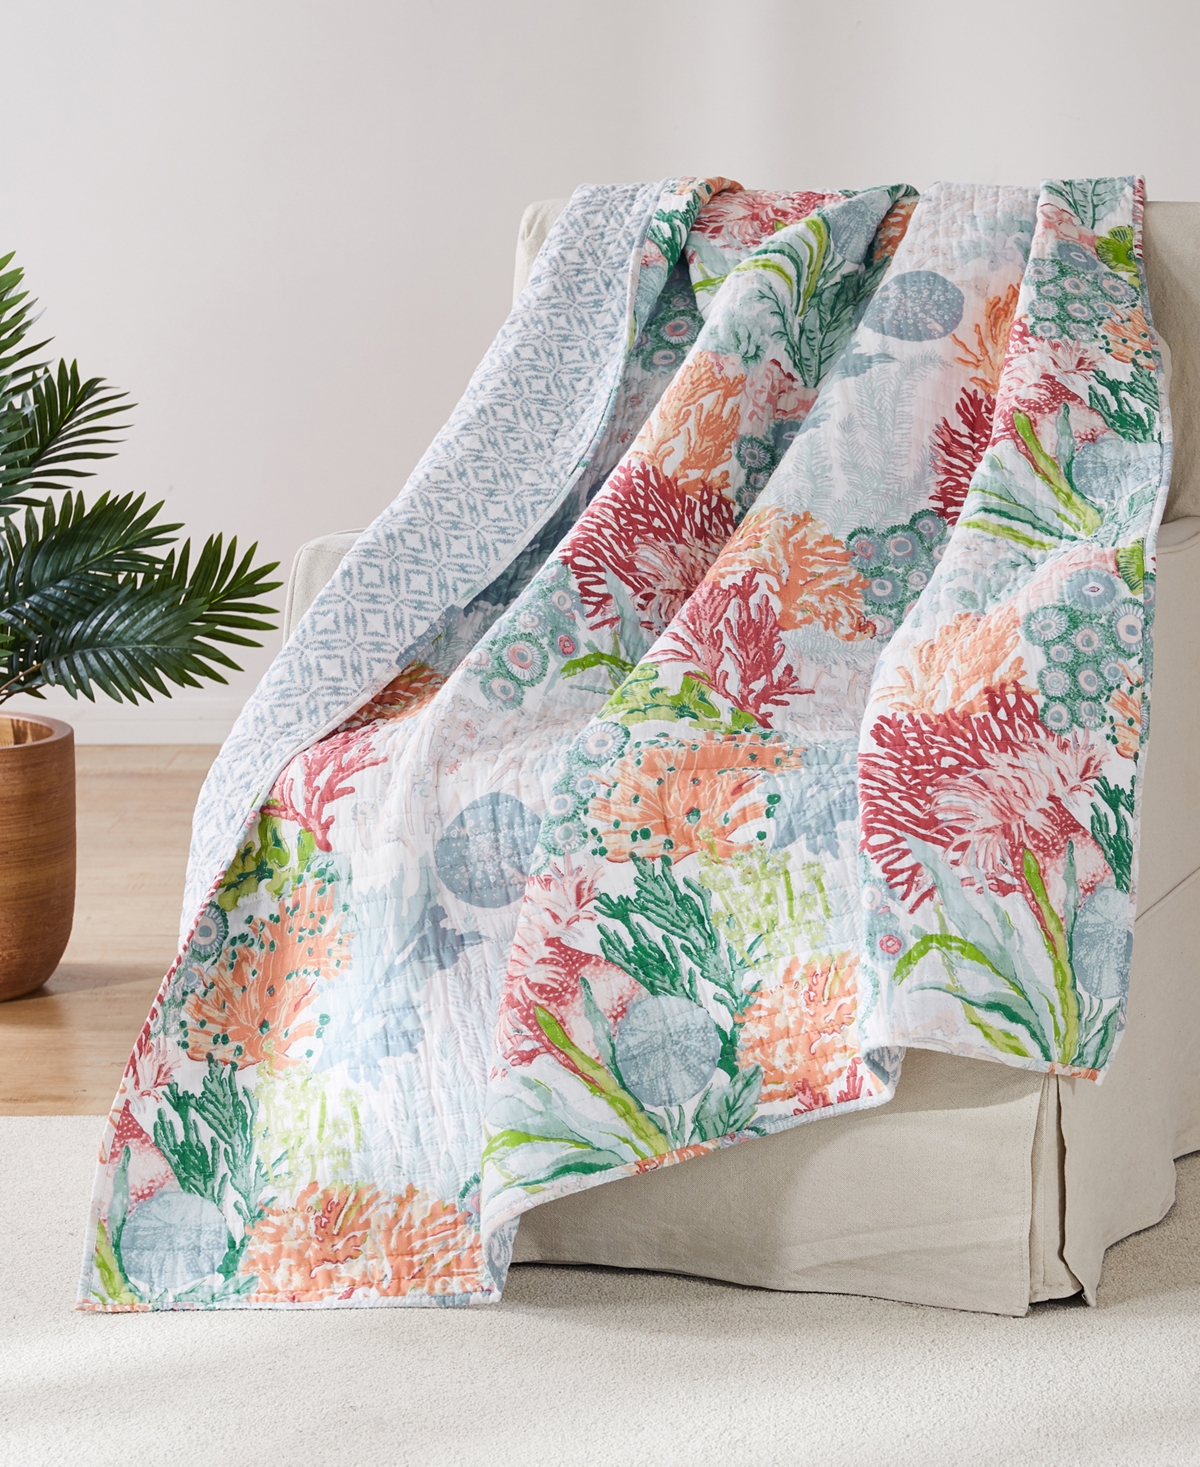 Levtex Sunset Bay Reversible Quilted Throw, 50" X 60" In Multi